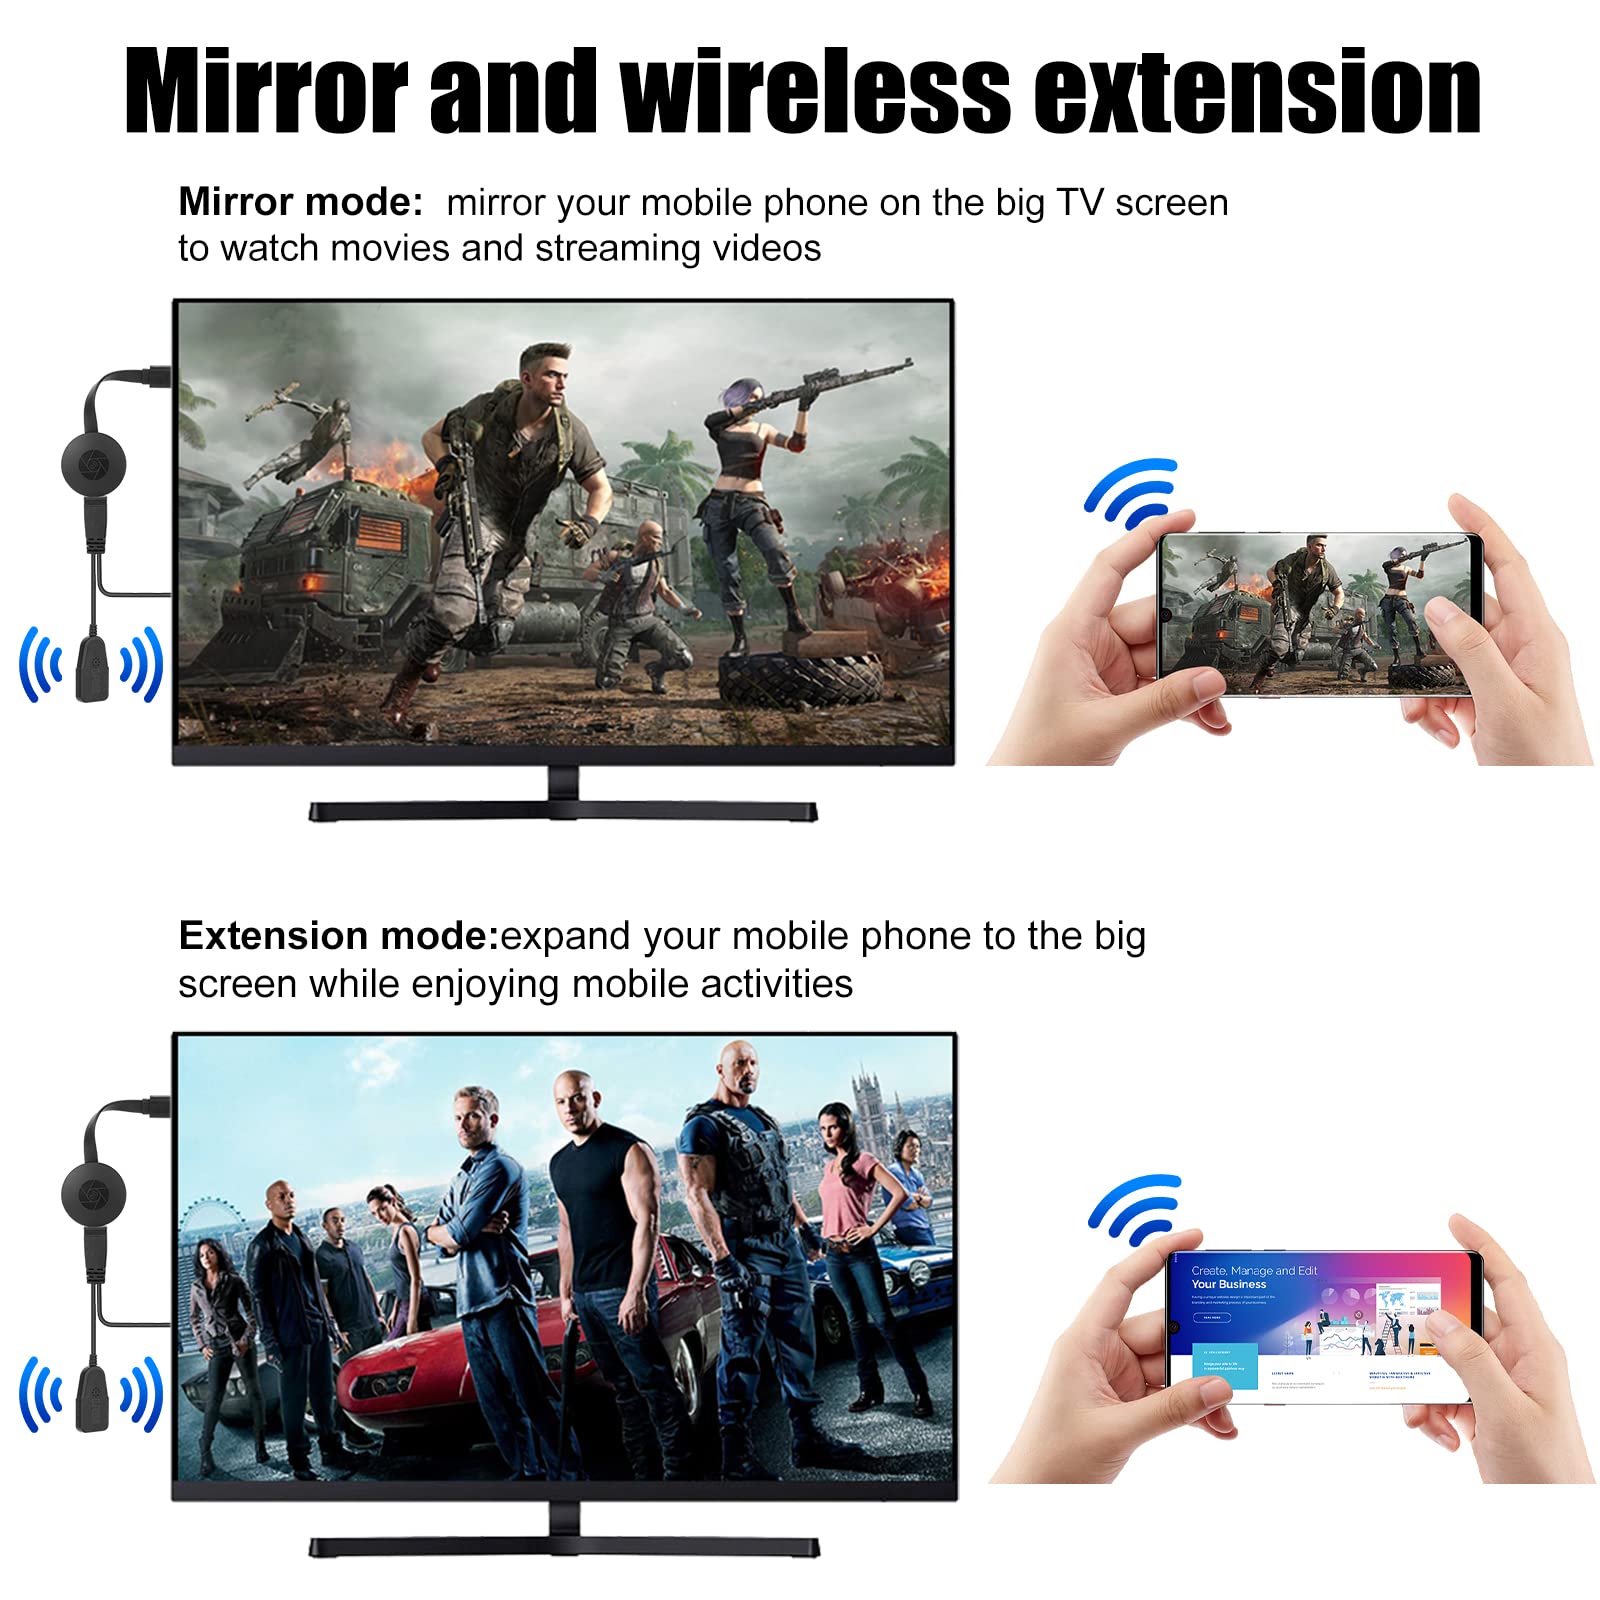 Miracast Dongle,Wireless HDMI Display Dongle Adapter, Screen Mirroring Adapter for i-Phone, i-Pad, Android, Tablet, Laptop, Window to HDTV/Monitor/Projector, Compatible Miracast, Air Play, DLNA